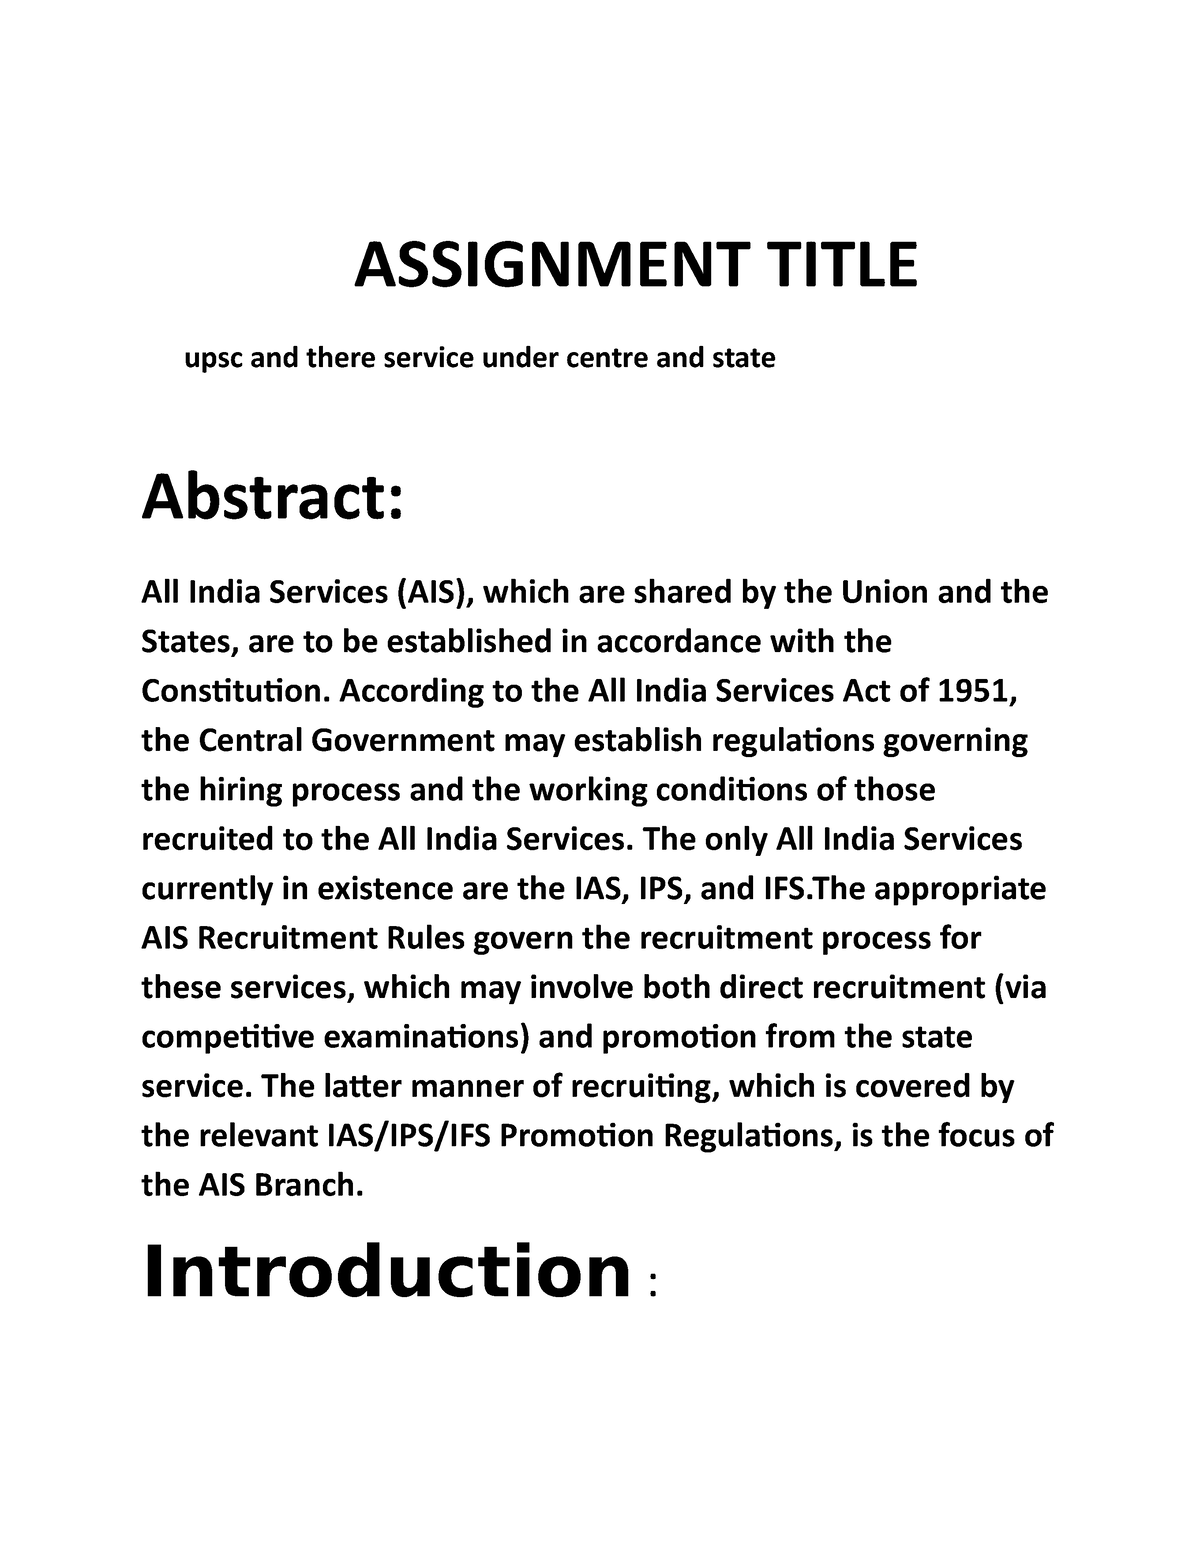 assignment on upsc